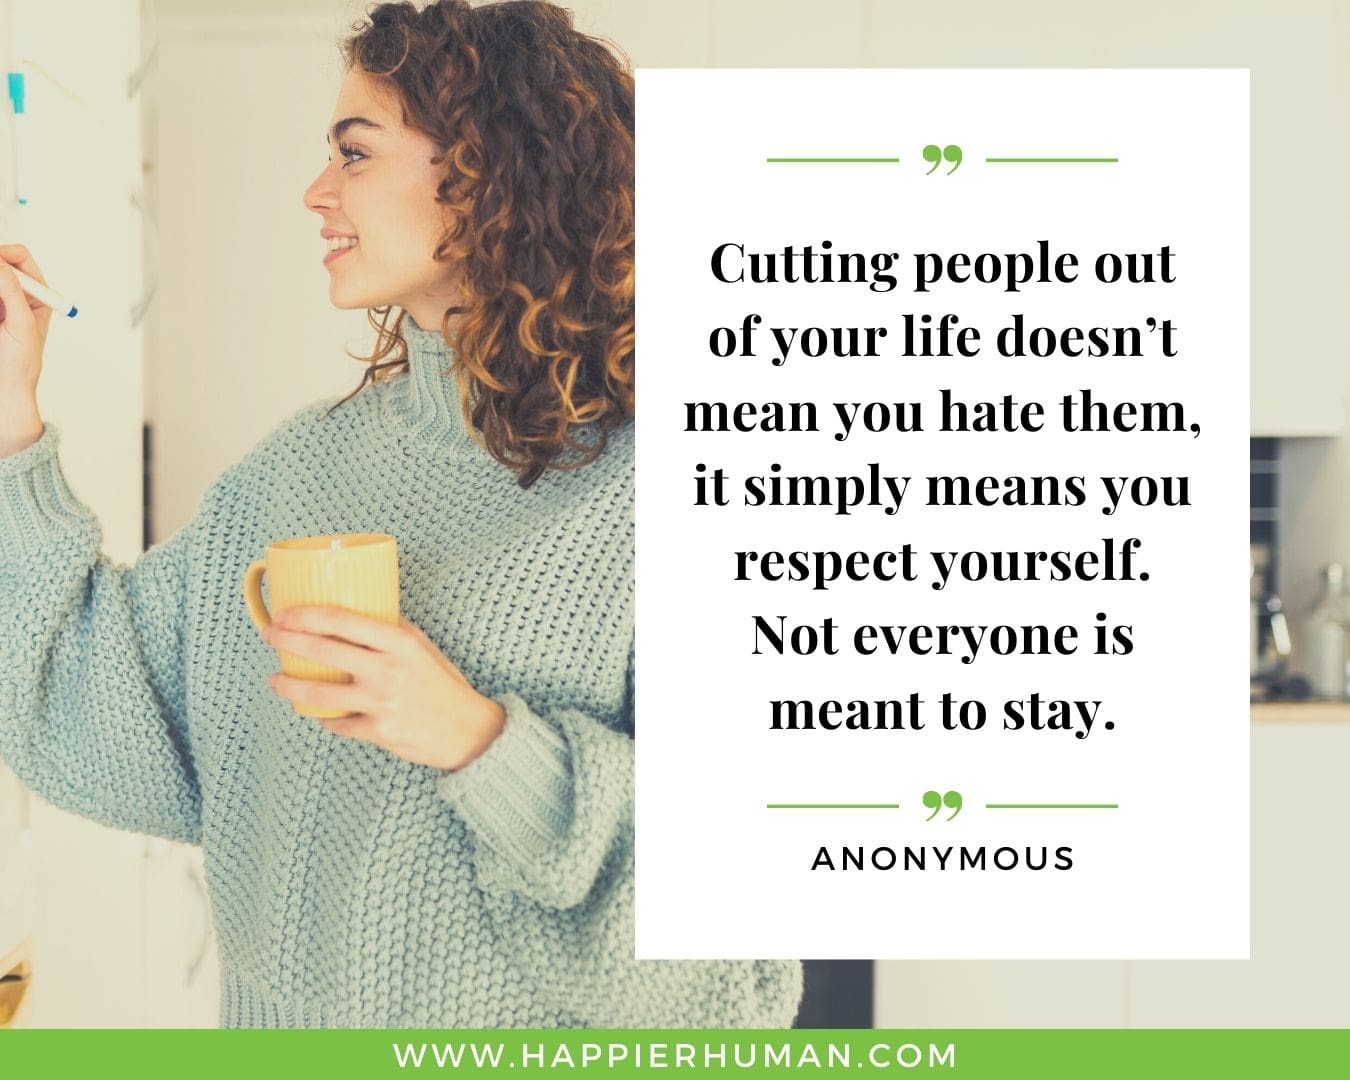 Toxic People Quotes - “Cutting people out of your life doesn’t mean you hate them, it simply means you respect yourself. Not everyone is meant to stay.” – Anonymous